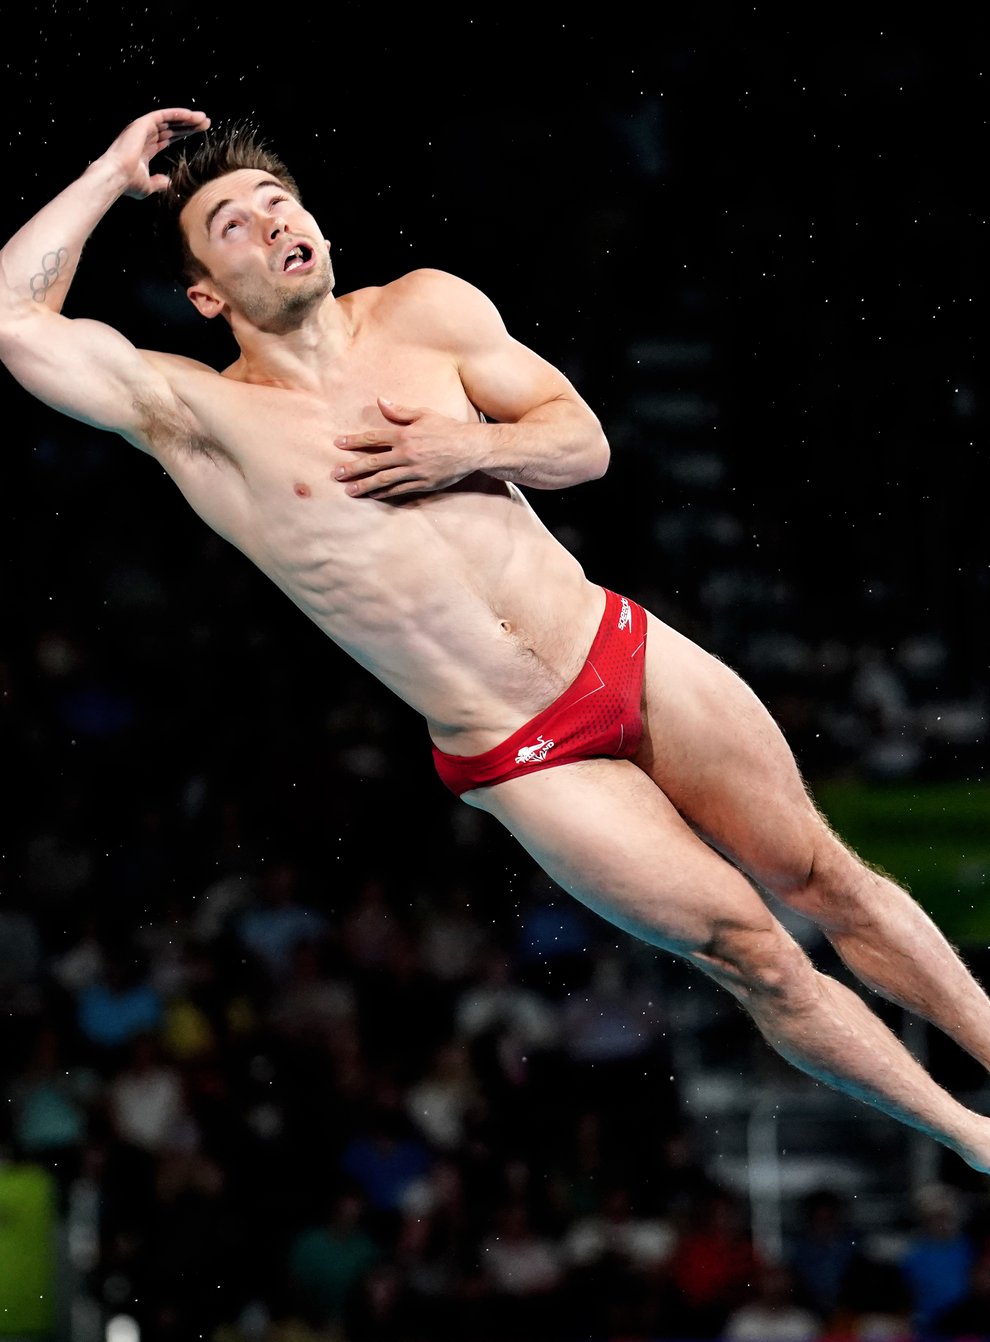 England’s Daniel Goodfellow grabbed gold in the 3m men’s springboard final at the 2022 Commonwealth Games in Birmingham (David Davies/PA)